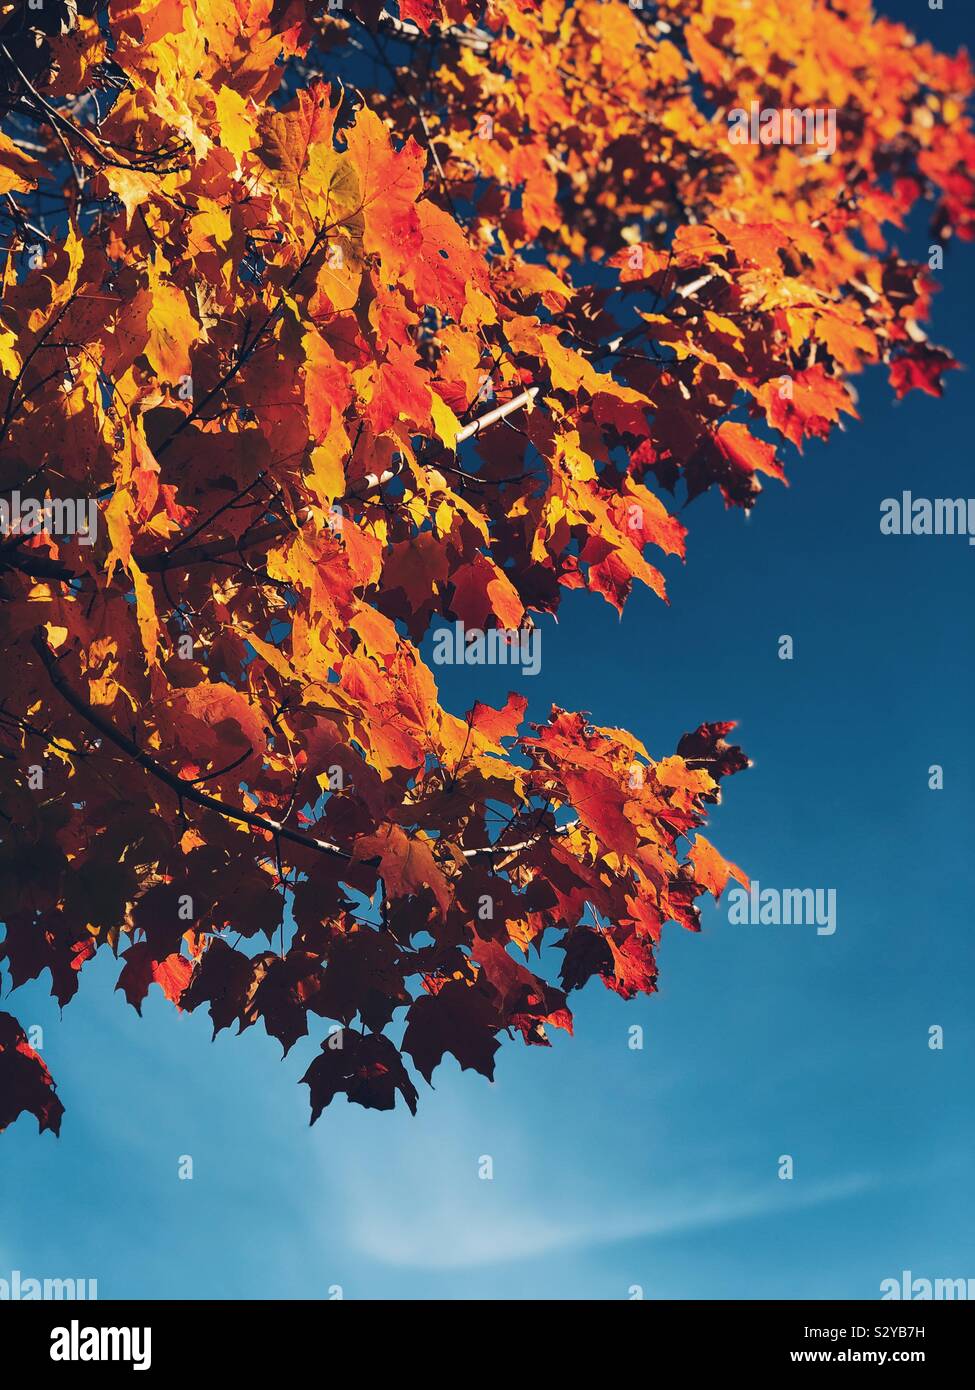 Red, orange and yellow leaves of an autumn tree against blue sky background Stock Photo